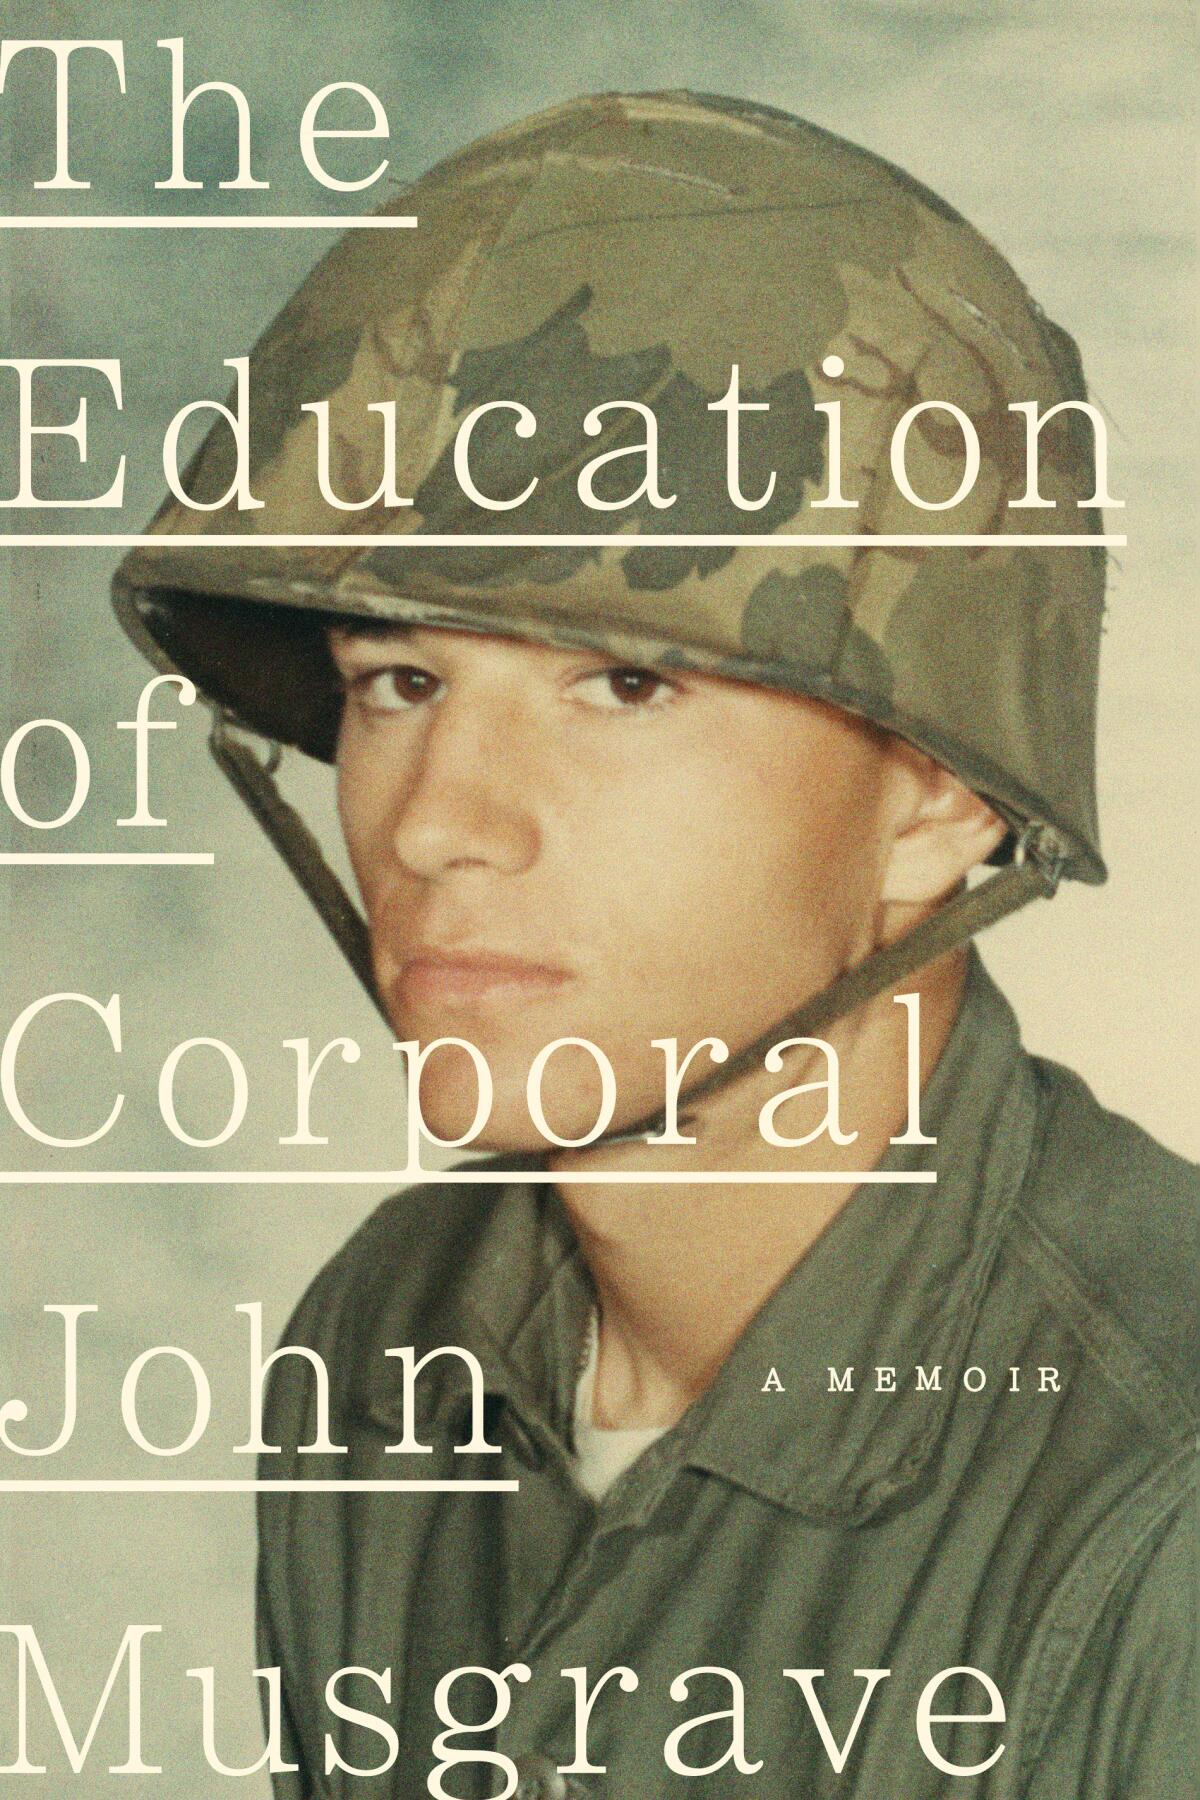 A photo of John Musgrave as a young Marine in "The Education of Corporal John Musgrave."